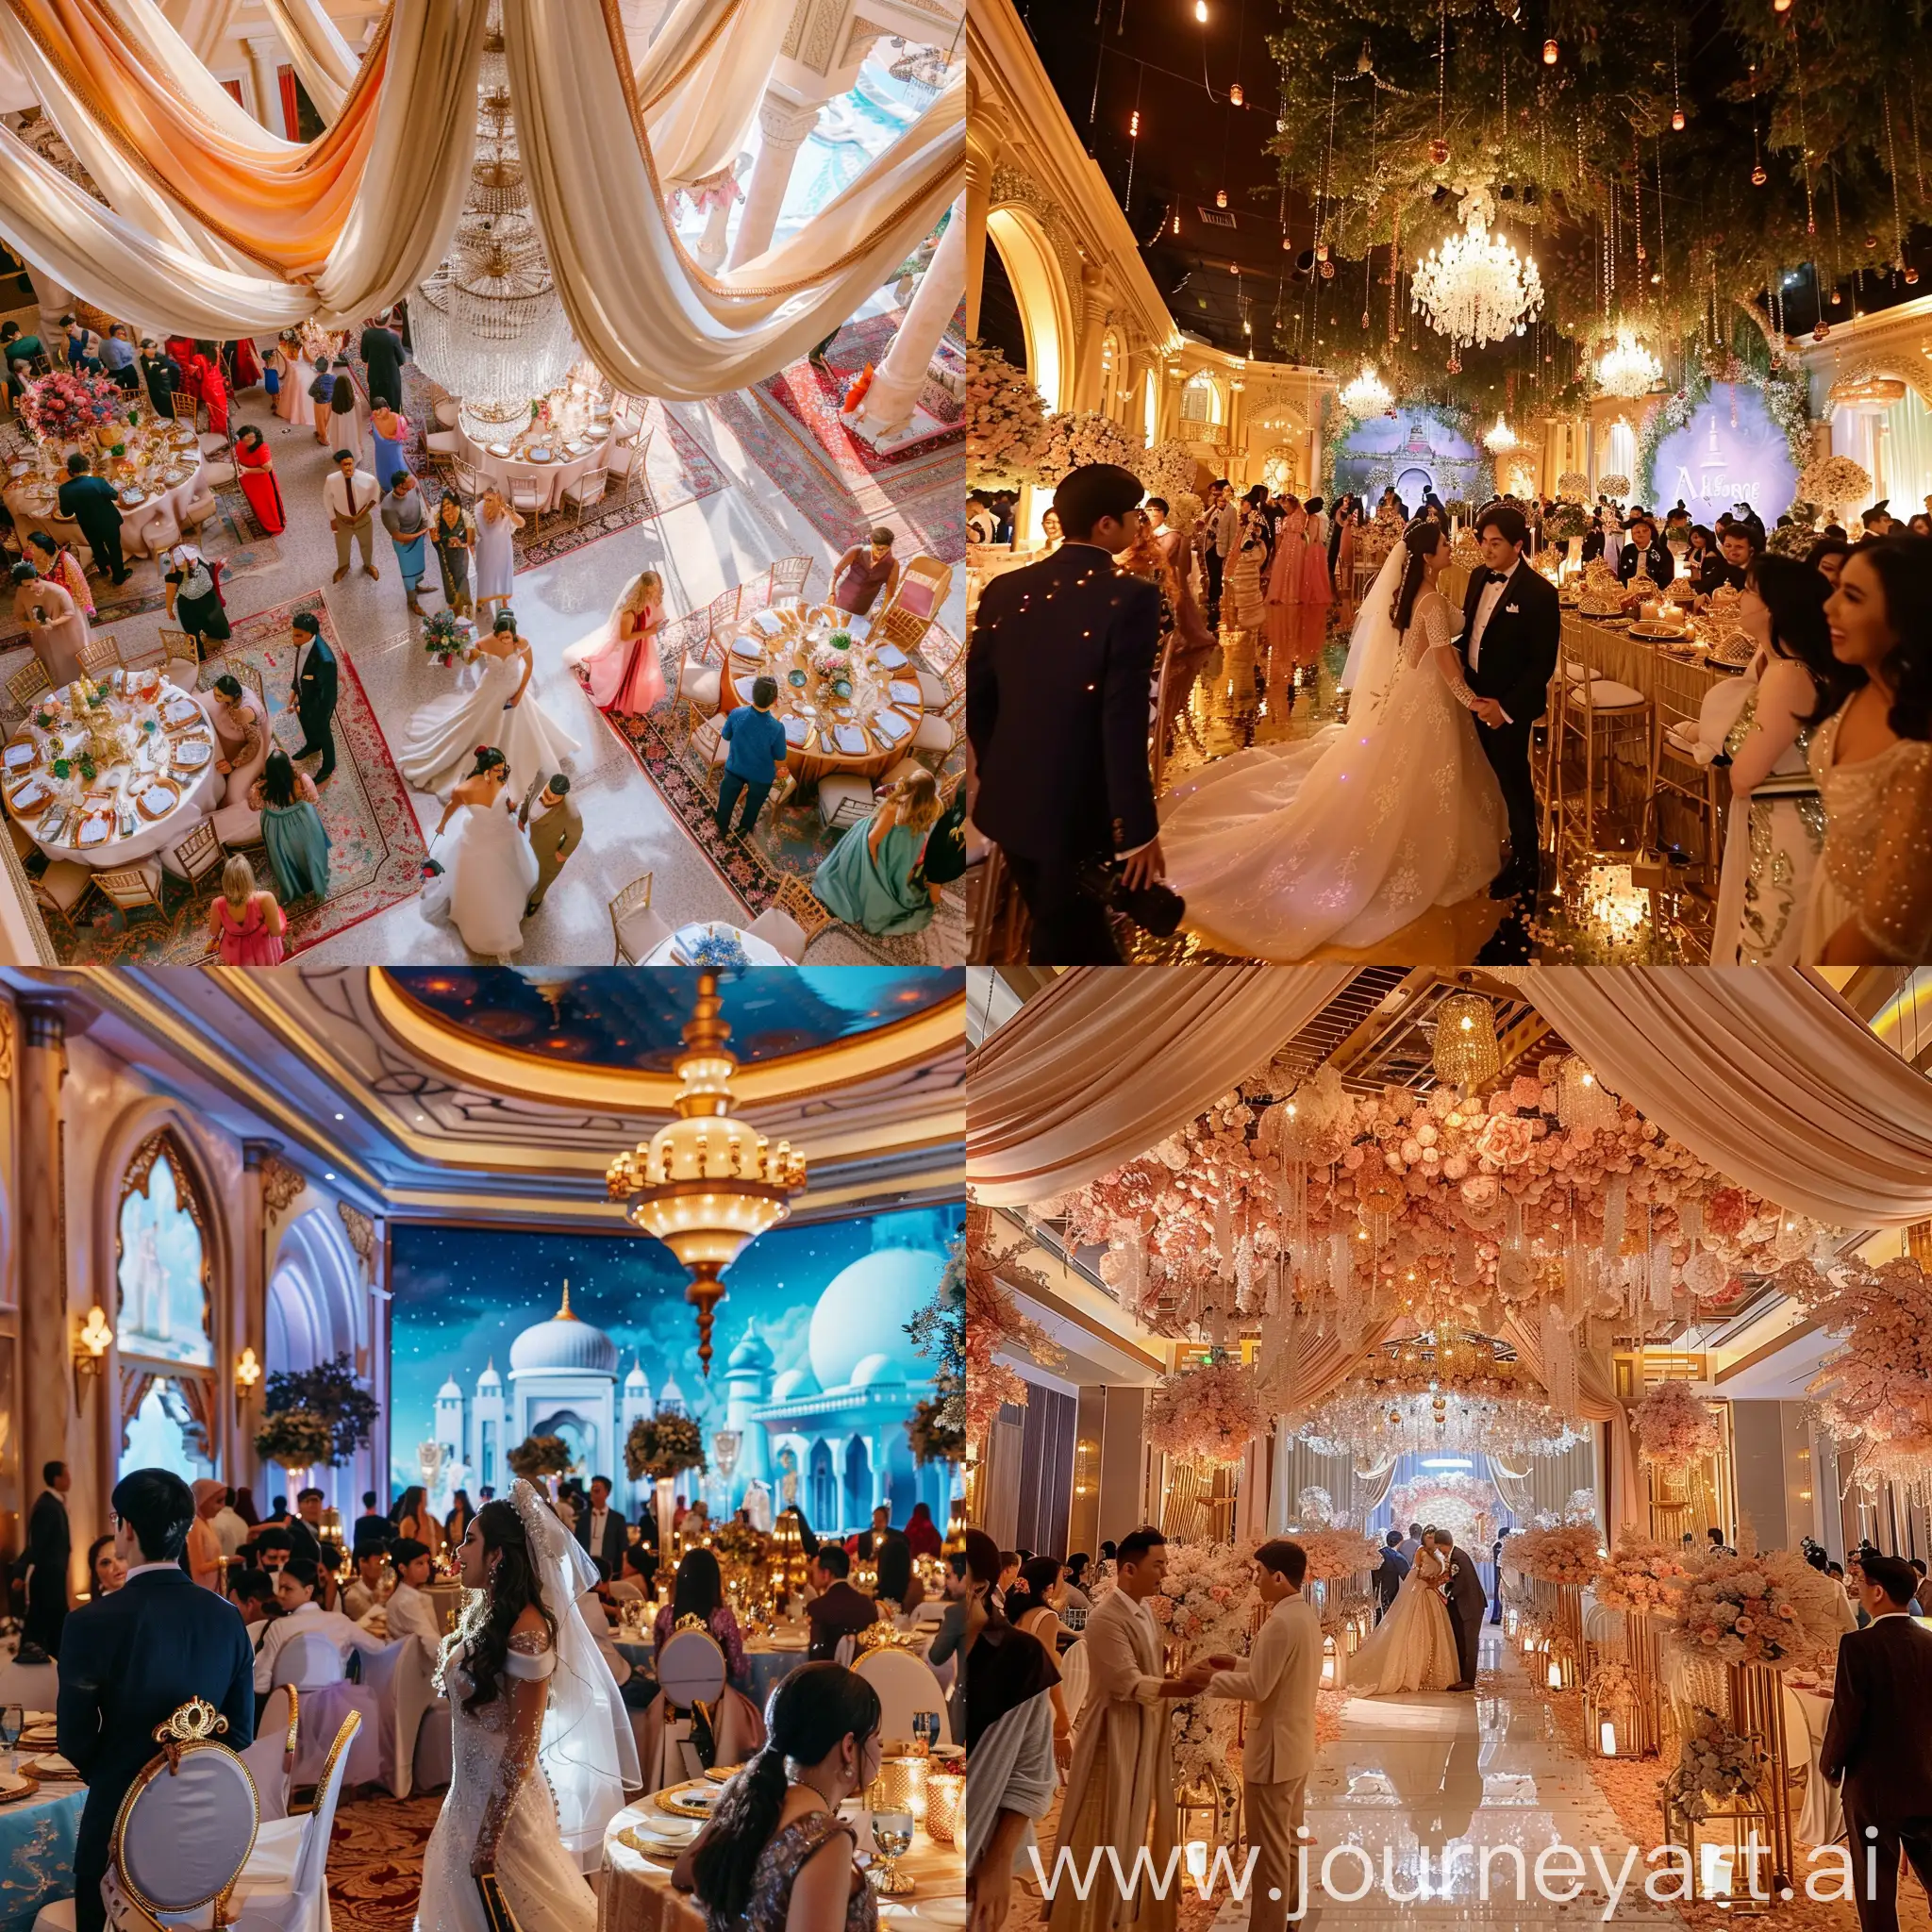 wedding hall with bride and groom, guests, the wedding theme is Aladdin